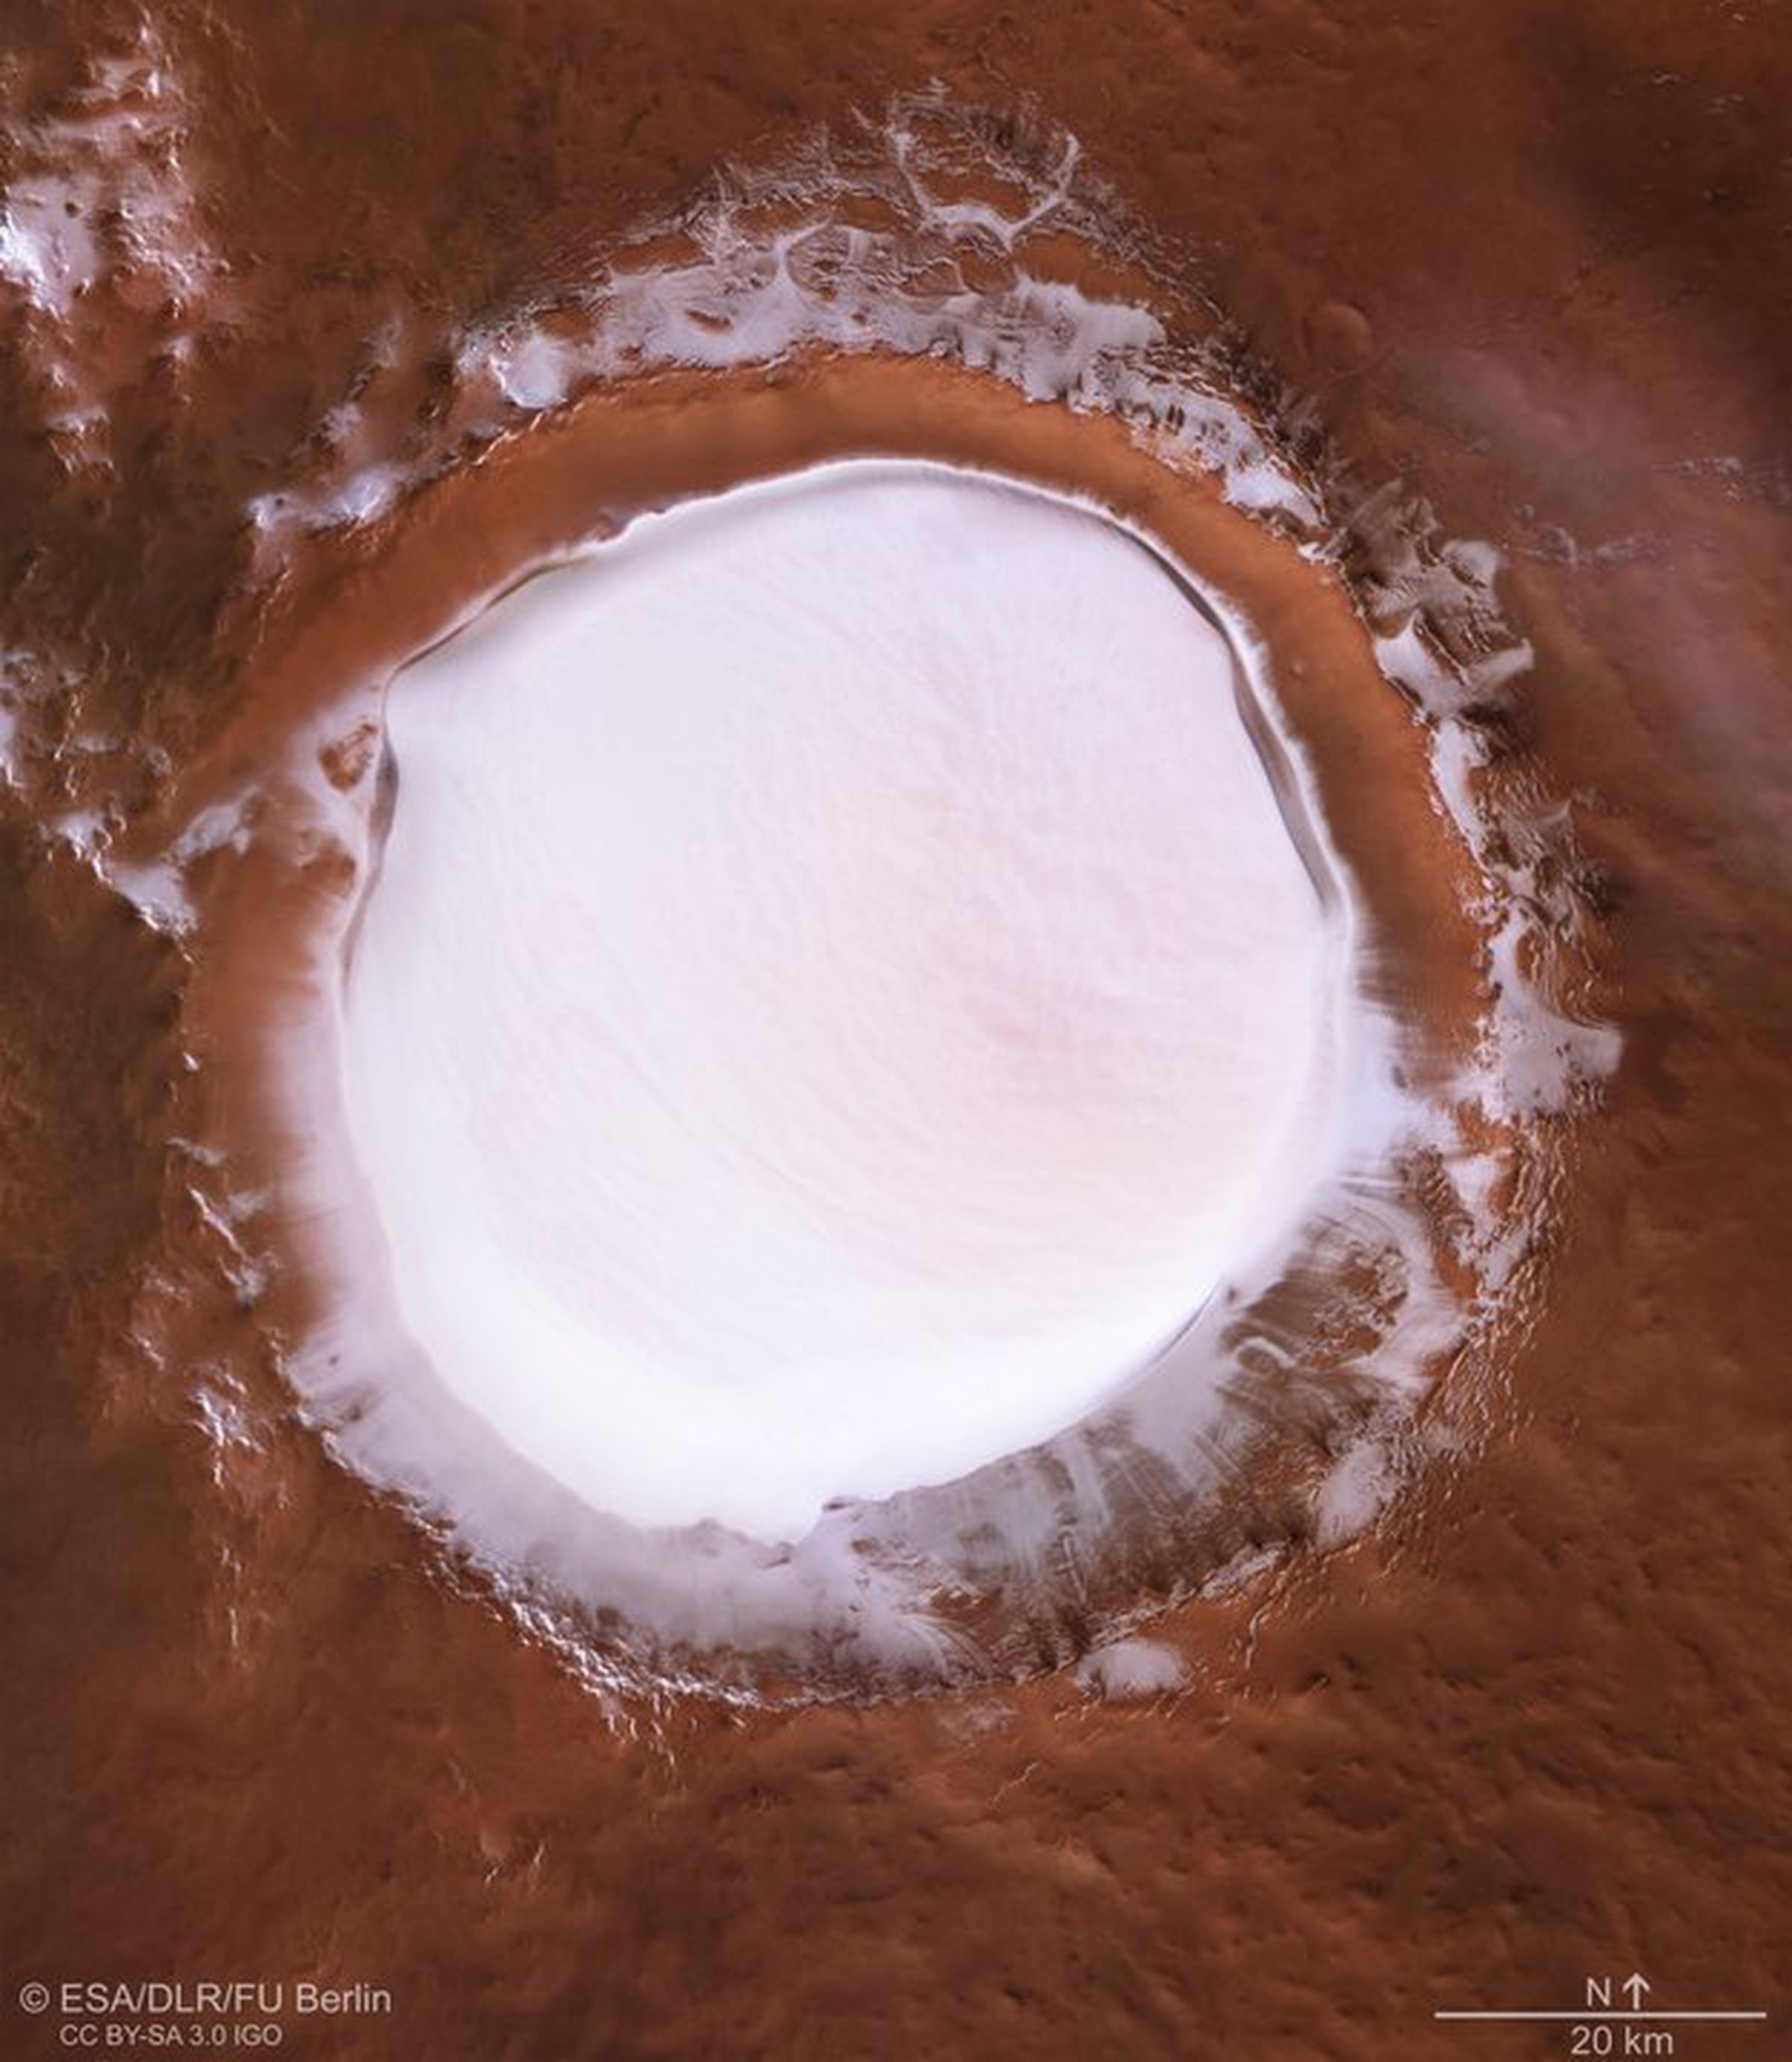 Another view of the Korolev crater